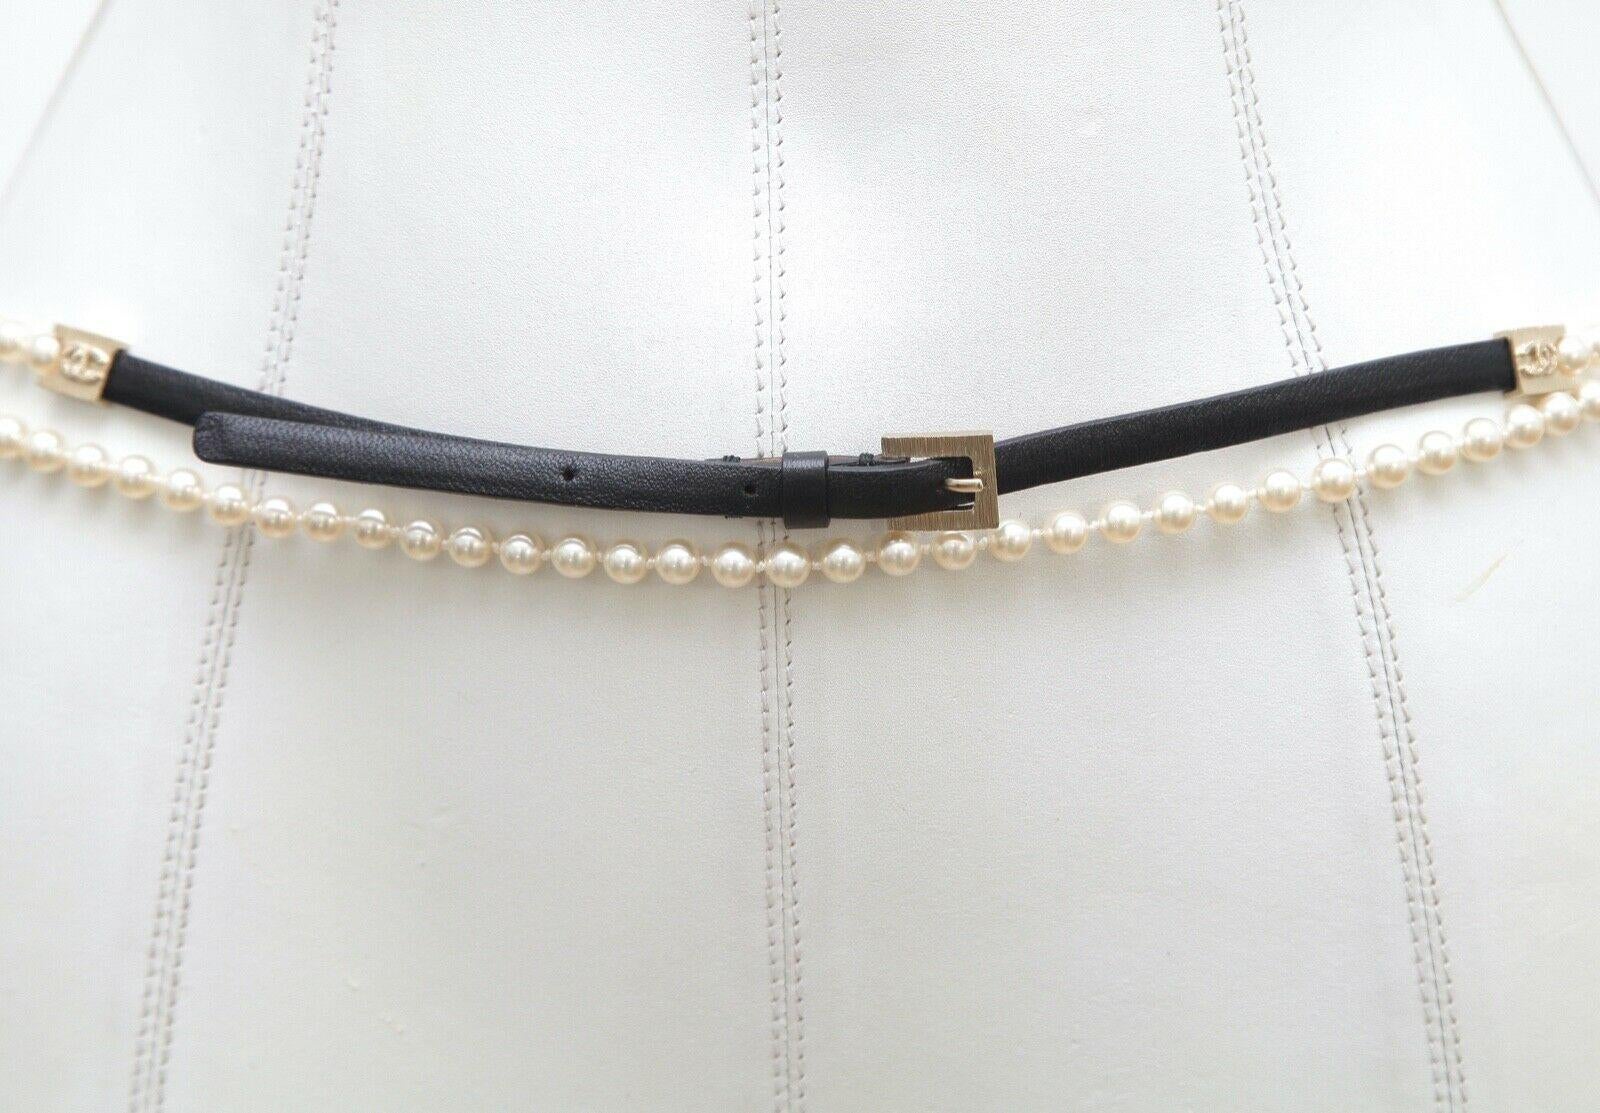 GUARANTEED AUTHENTIC CHANEL DOUBLE STRAND PEARL LEATHER BELT

Details:
- Faux pearl double strand and black lambskin skinny belt.
- Gold-tone hardware.
- Adjustable buckle.
- Comes with Chanel box.

Size: 80

Measurements (Approximate):
- Length: